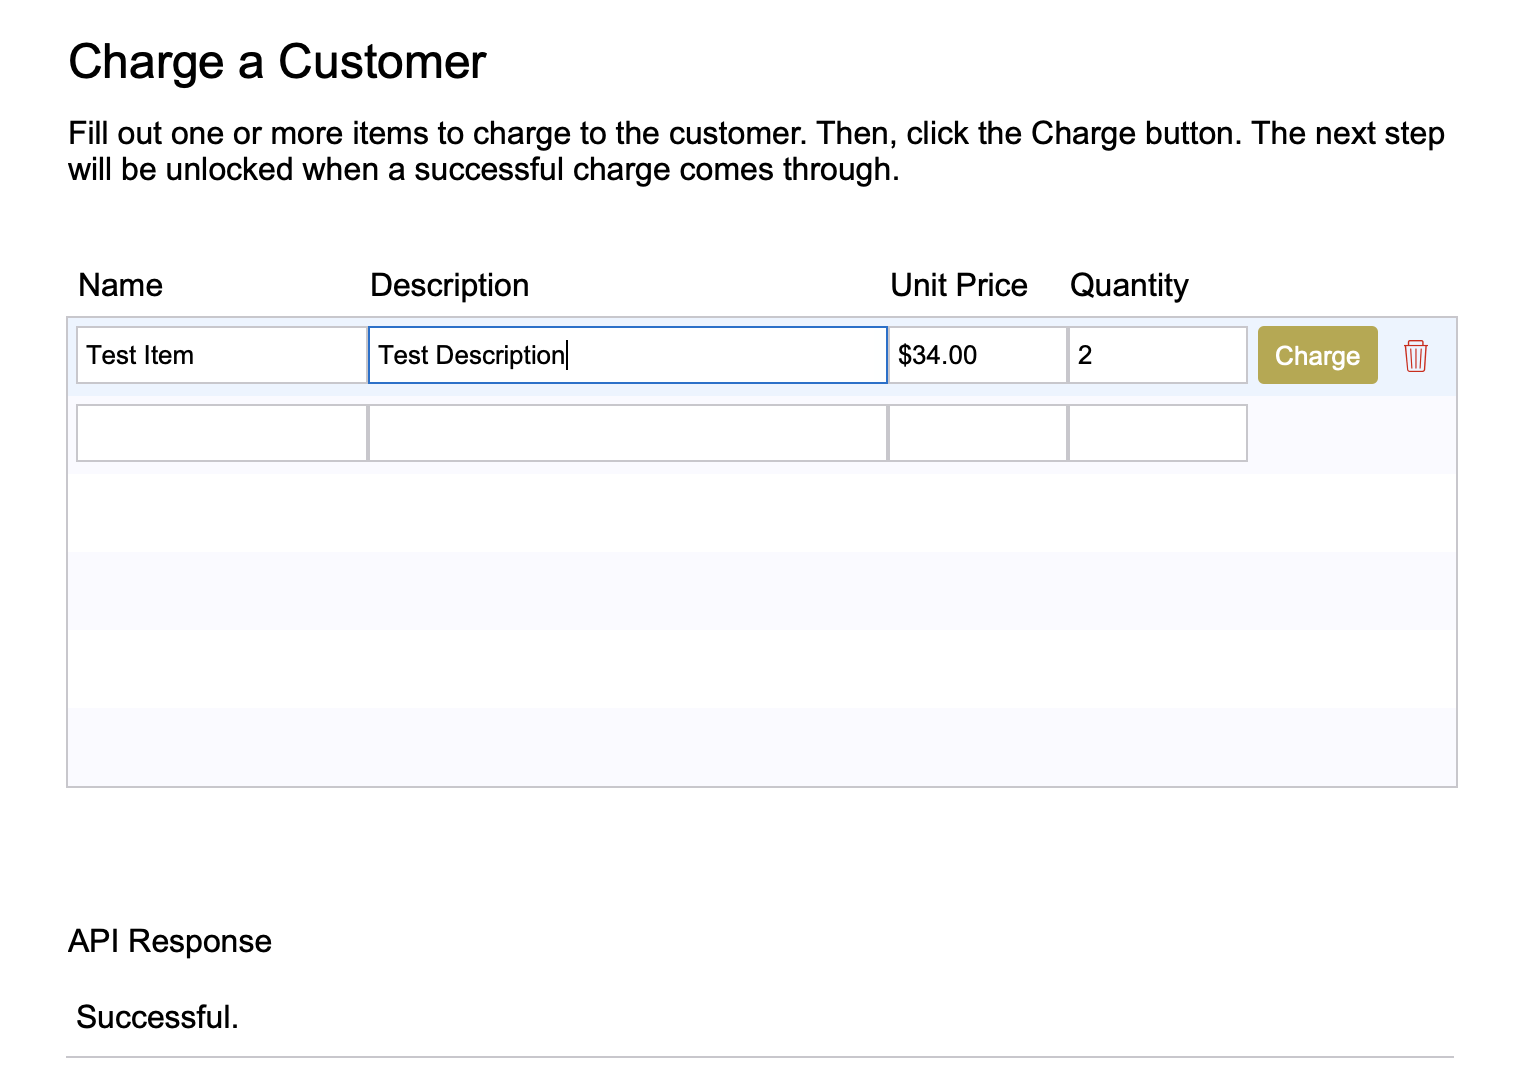 The screen where you input information about what to charge the customer for. There is a portal of related items to charge the customer for. In the portal, you can input a name, description, unit price, and quantity for the item, as well as charge the item to the customer's Authorize.net profile and delete the item from the portal.